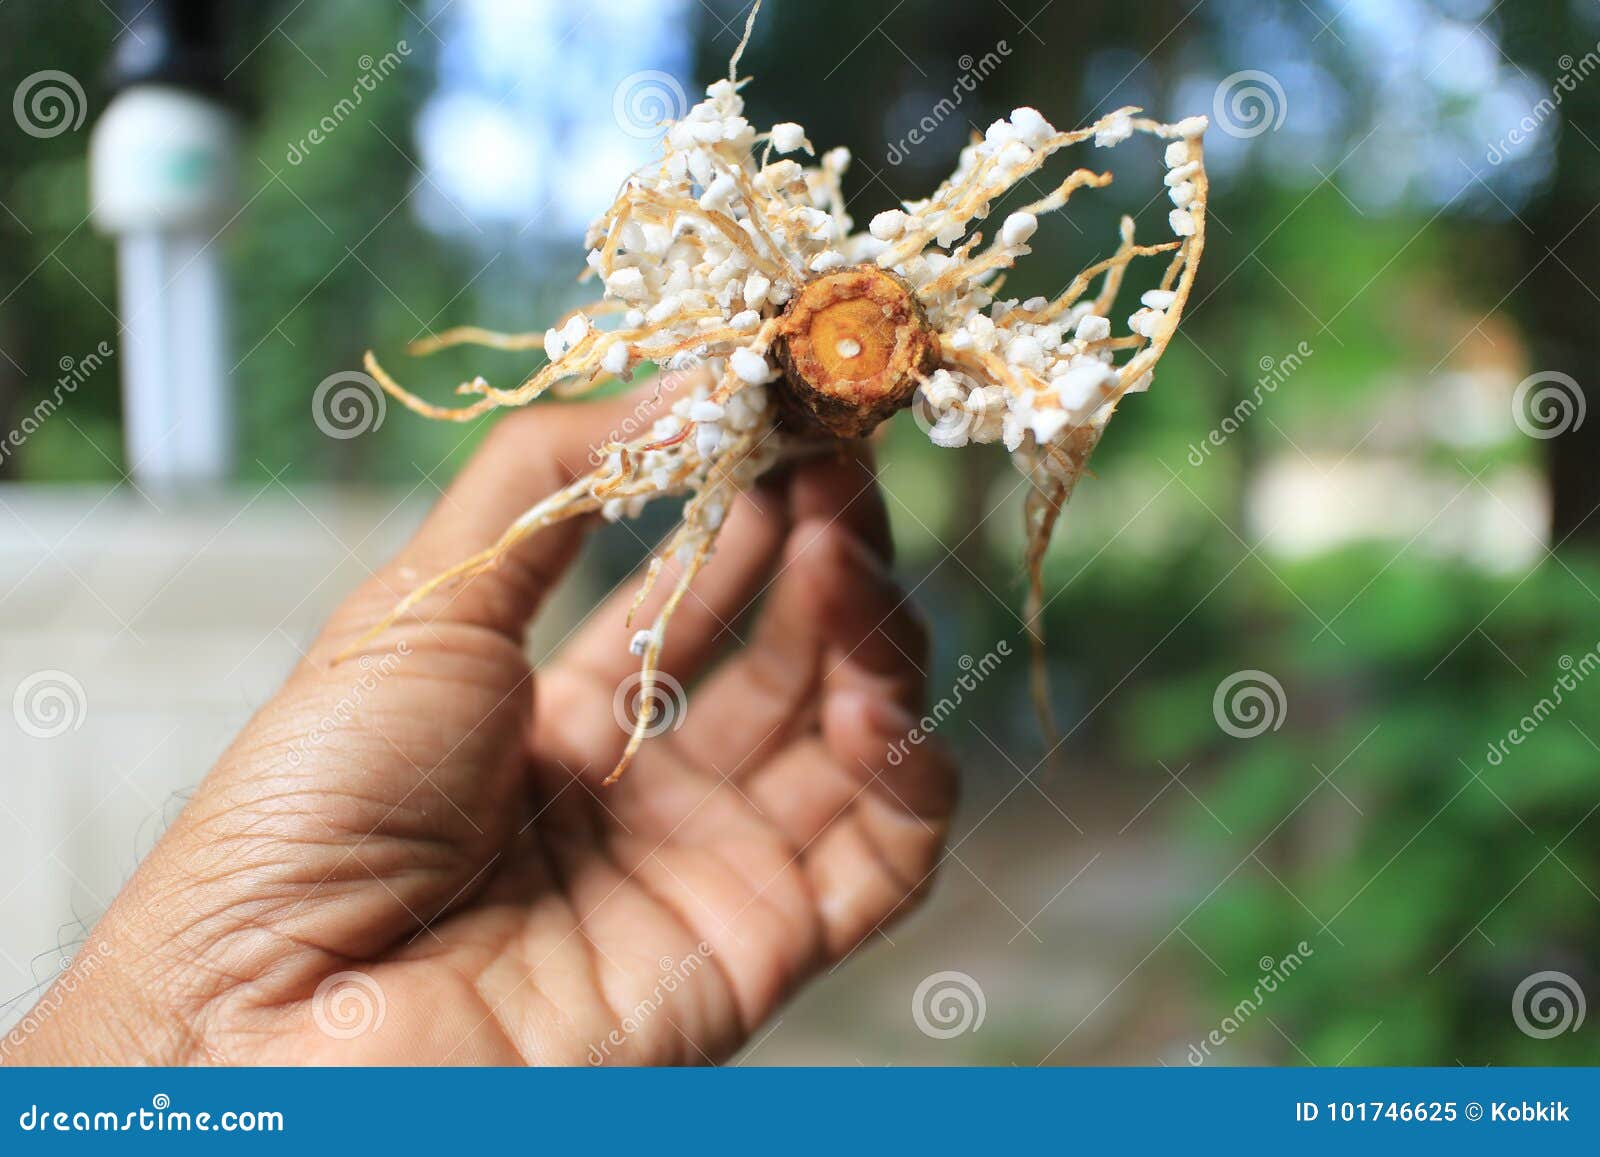 Roots from Plant Propagation Method. Stock Image - Image of caricar,  health: 101746625